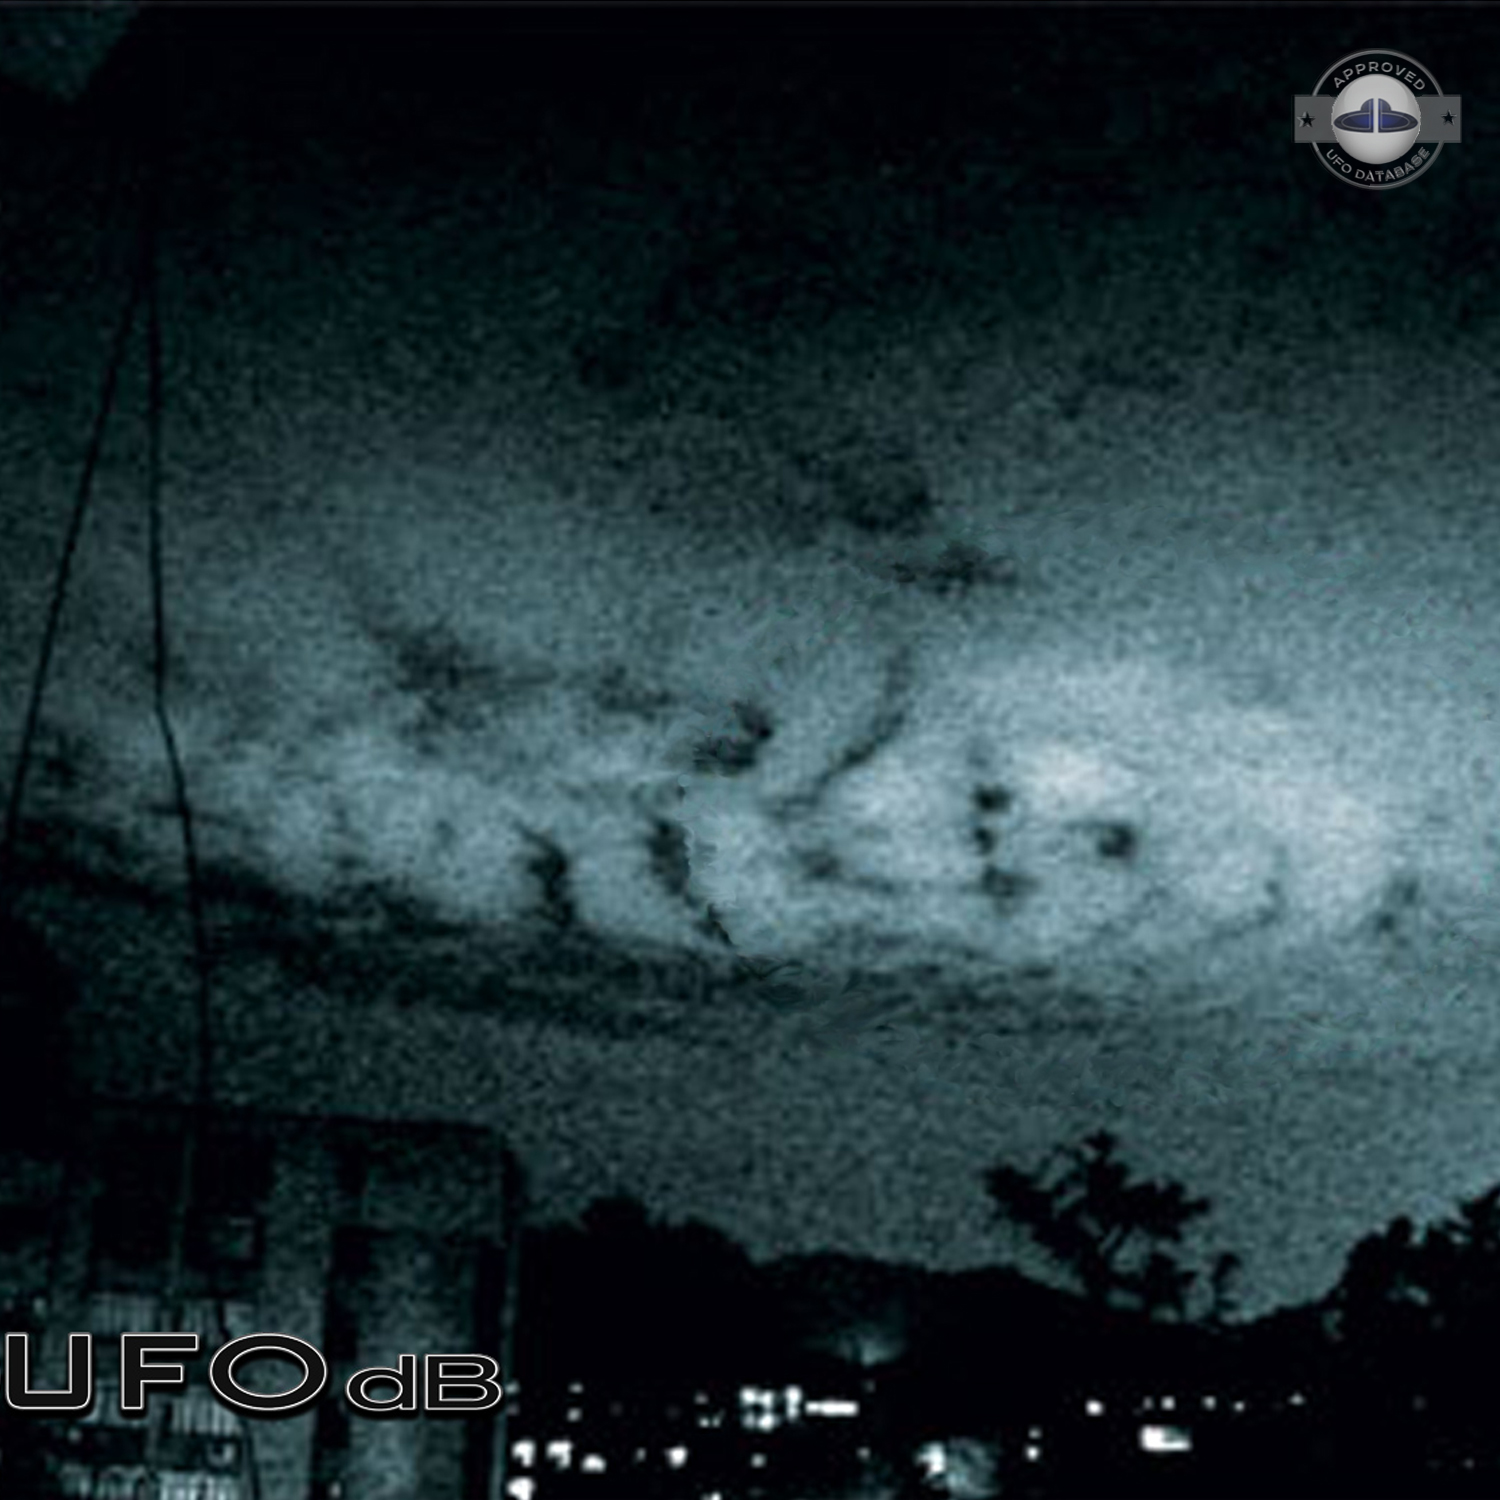 Huge UFO mothership moving in clouds over Guangzhou, Guangdong, China UFO Picture #176-2